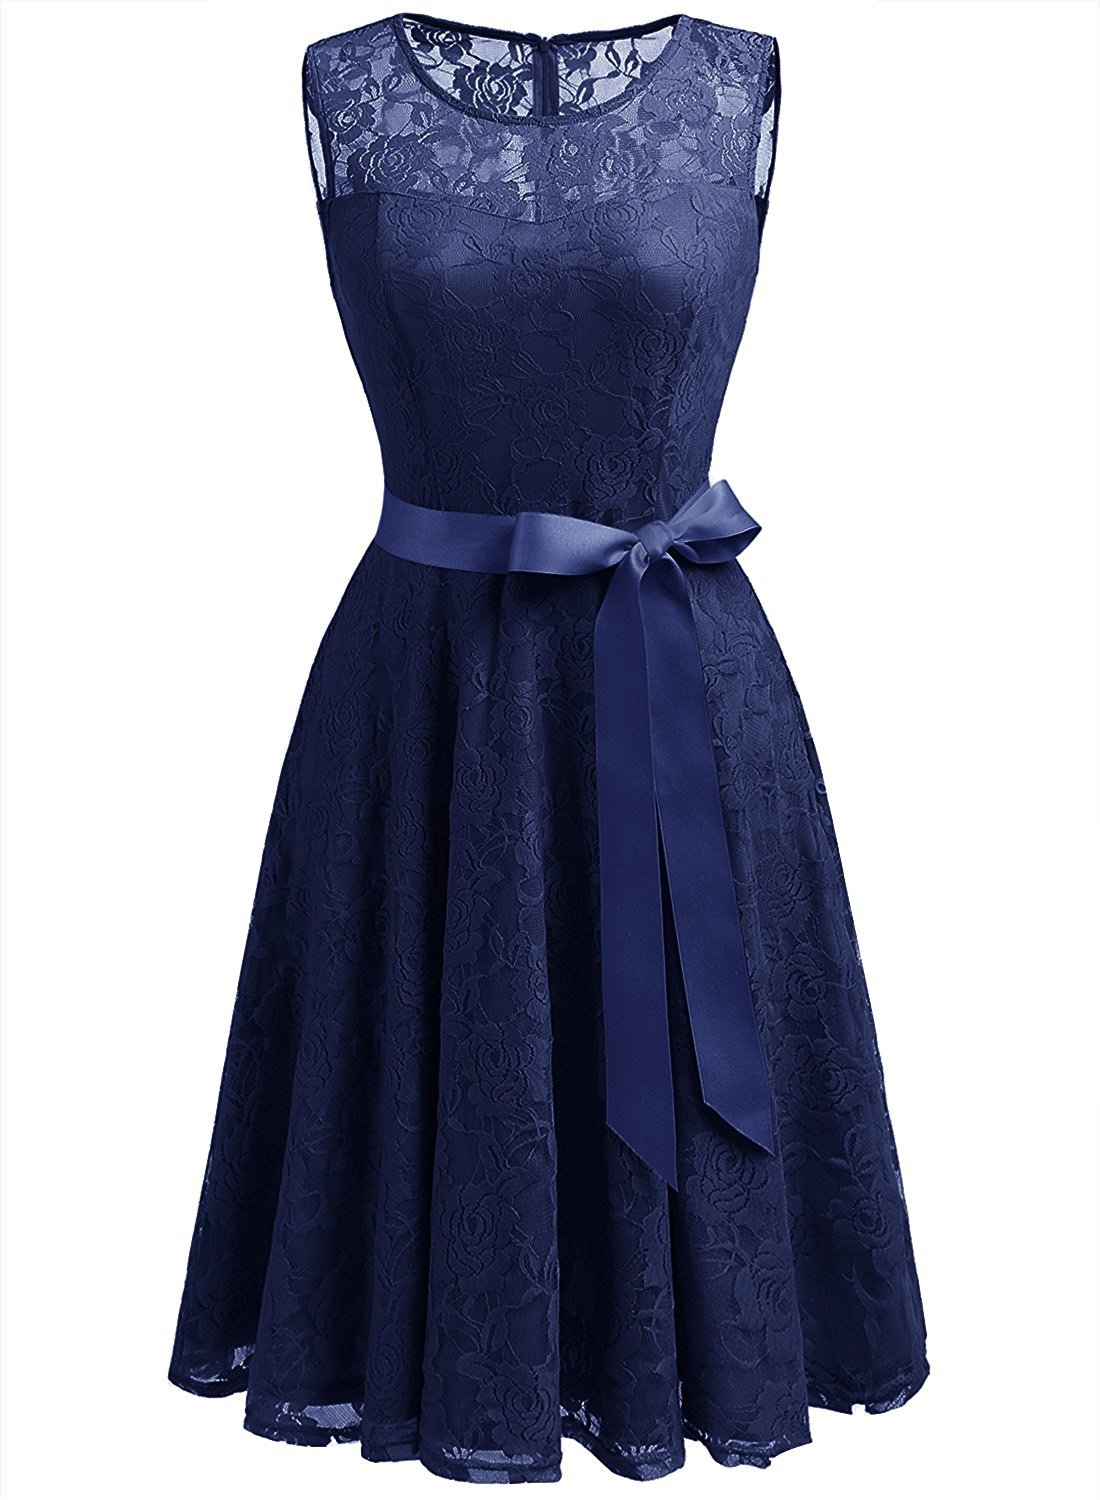 Navy Blue Chiffon Homecoming Dress Scoop Neck Lace Appliques Bow Tie Women Party Dress